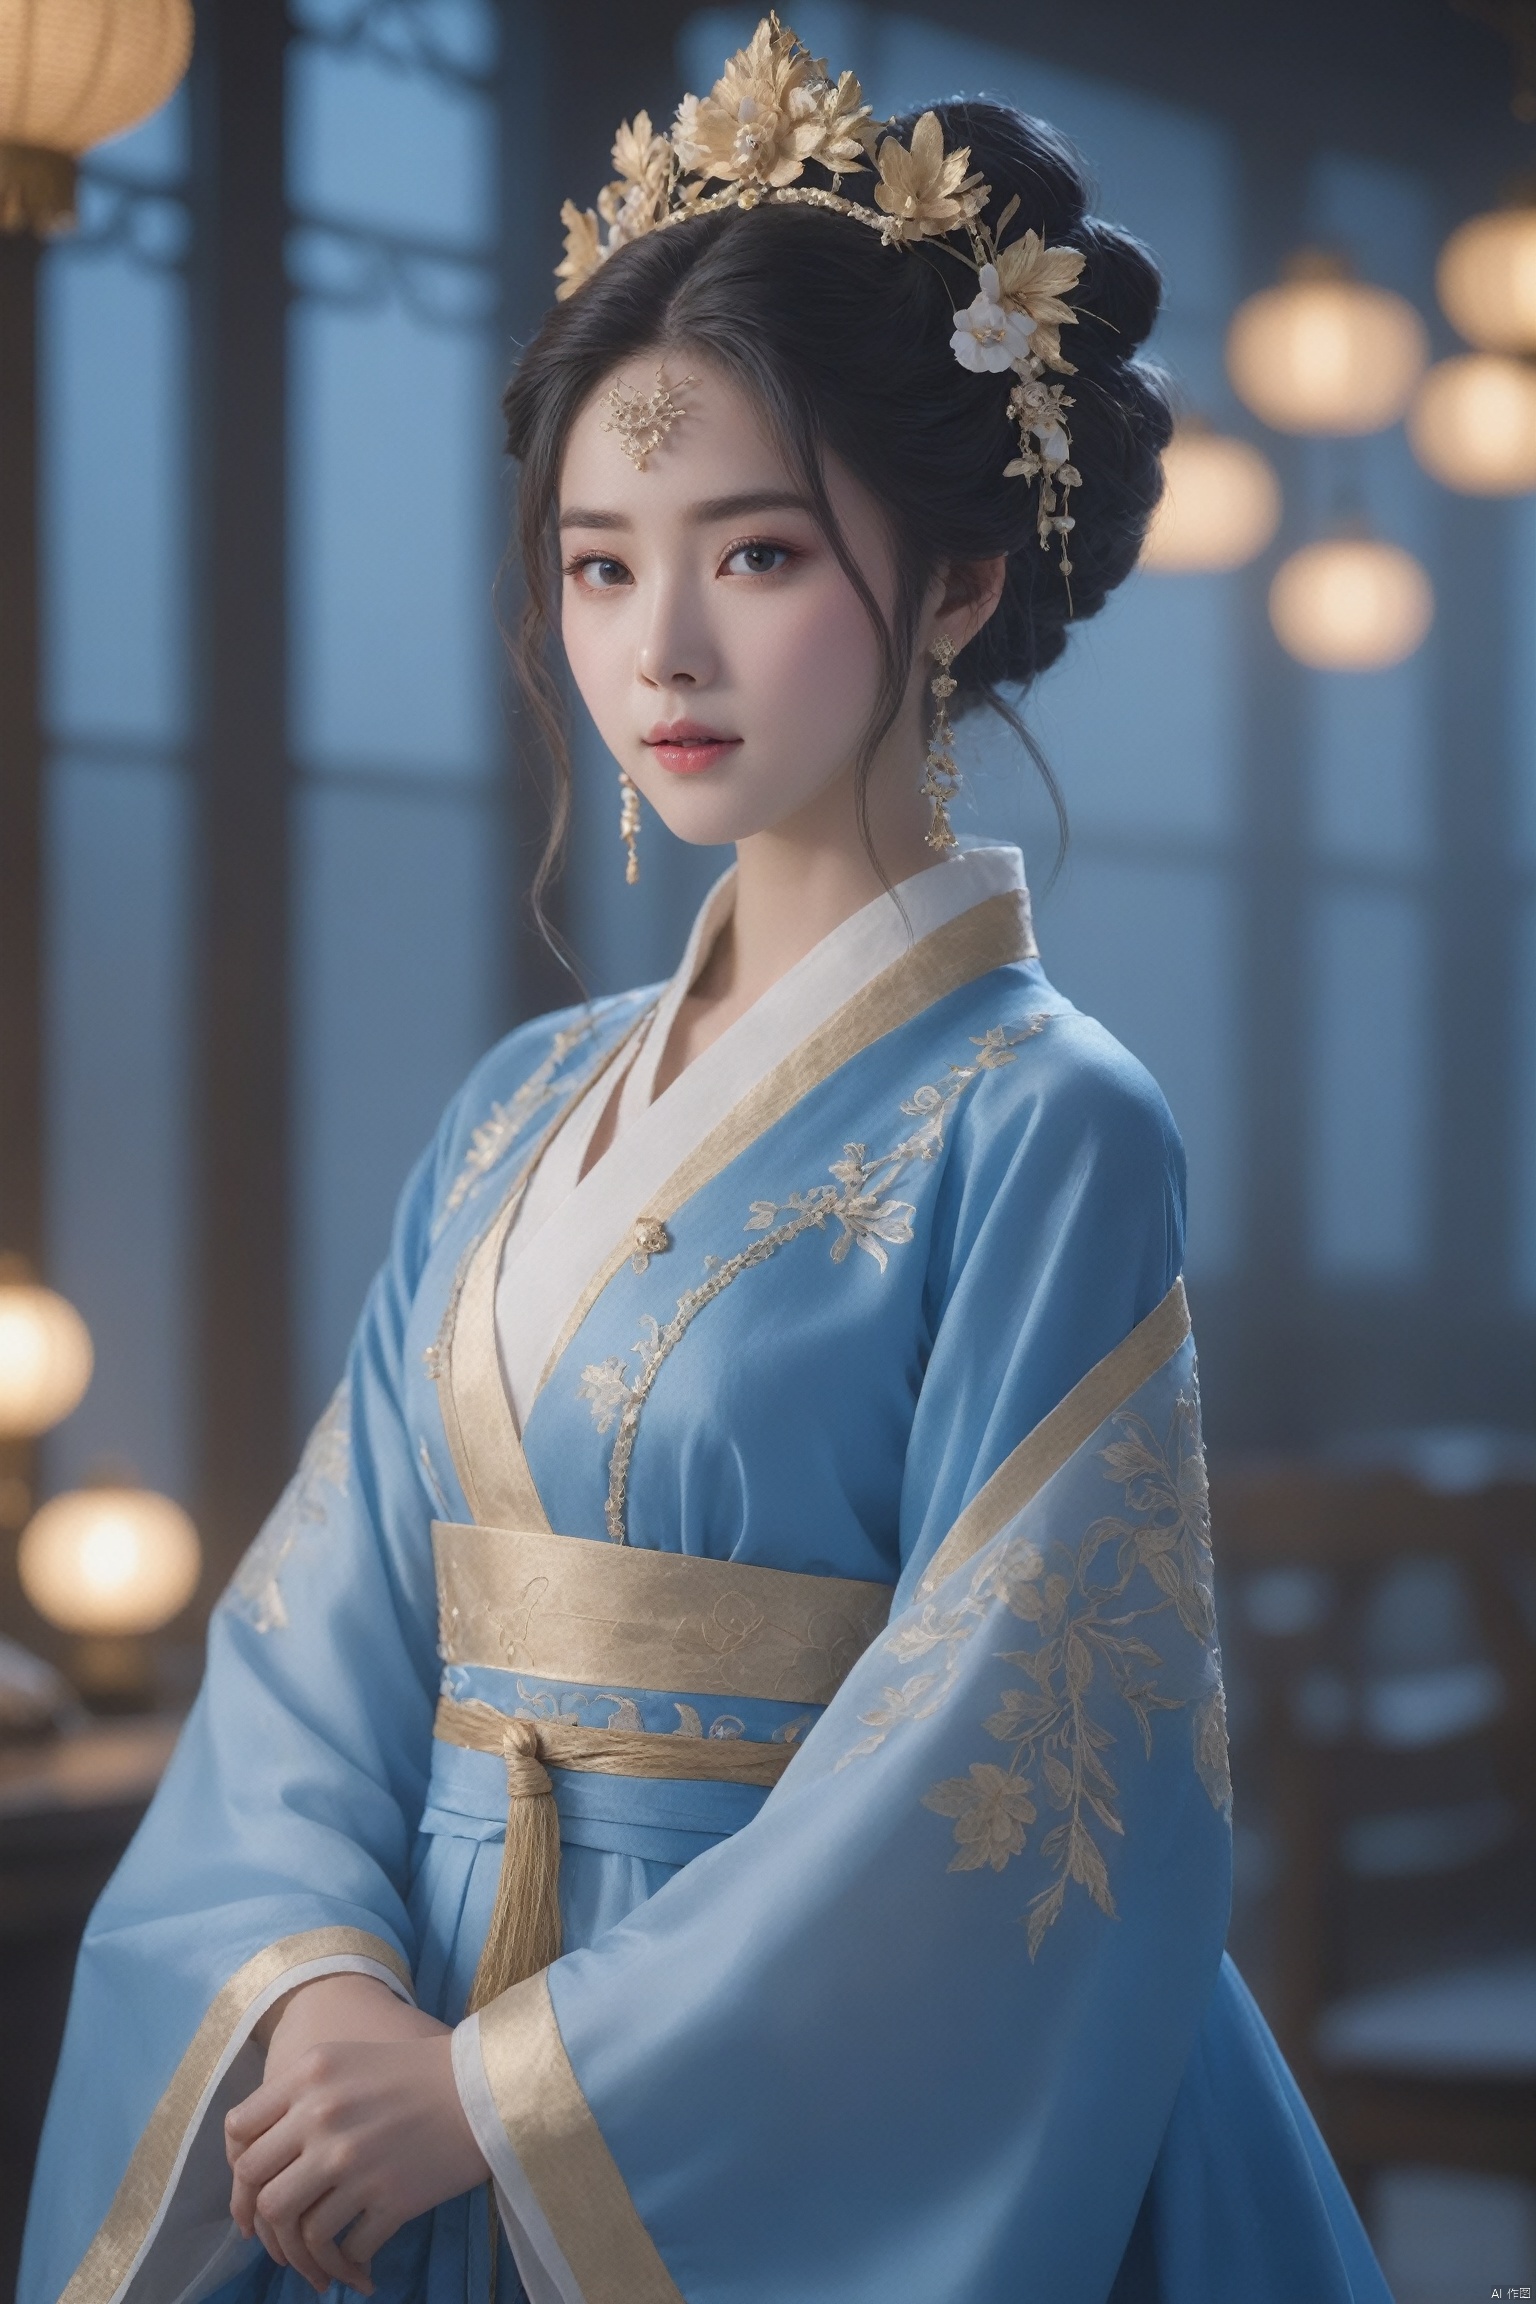 HUBG_Rococo_Style(loanword), 1girl, hanfu, Portrait of noble and graceful goddess, dressed in blue and gold, elaborate coiffure hairstyle, dark hair, decoration, 16K, UHD, HDR, Brilliant scene with bright lights, mist, numerous decorations, joyful atmosphere, light smile,
